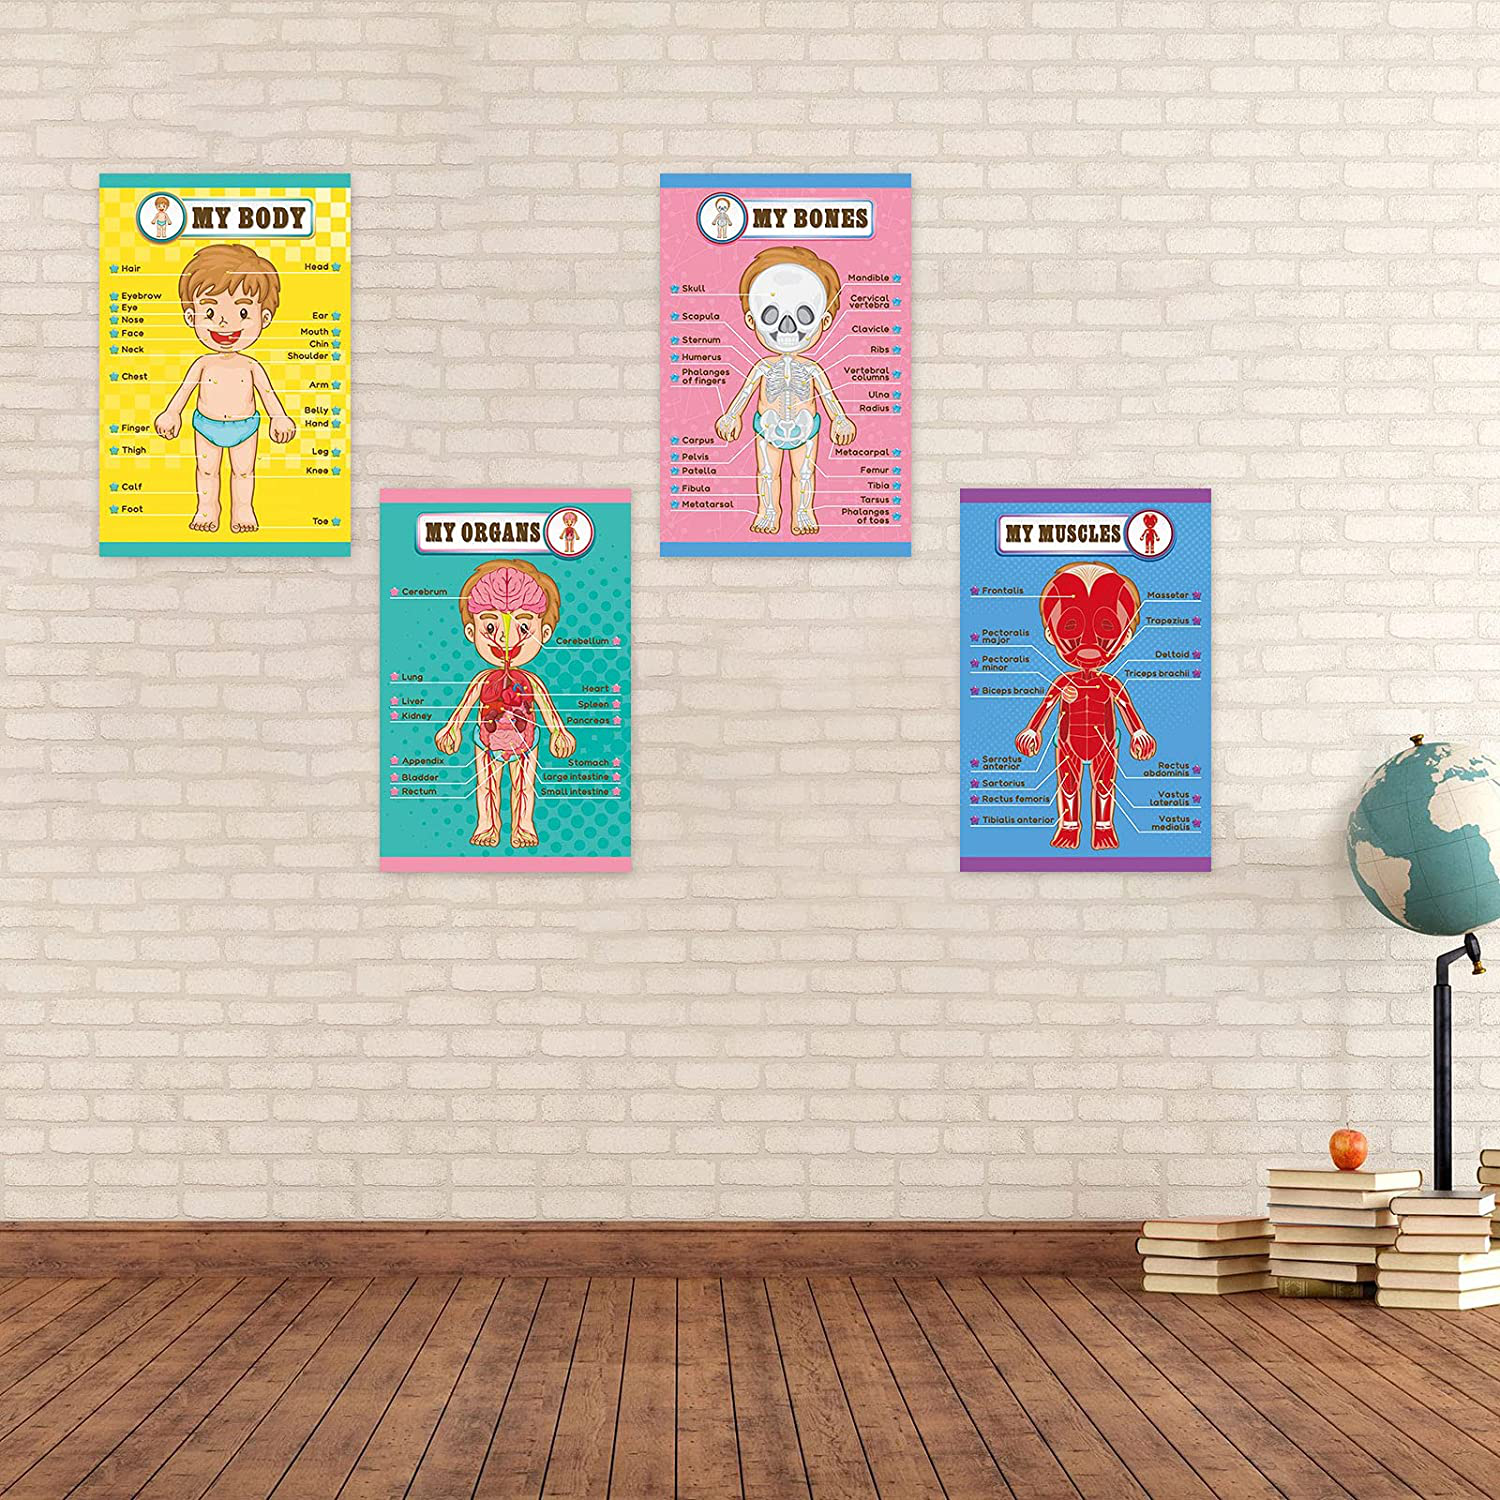 Human Body Educational Learning Posters Body Parts Learning Wall Chart for Kids Cartoon Anatomy Chart Educational Poster Preschool Kindergarten Teaching Supplies, Classroom Decoration, 17 x 11 Inch